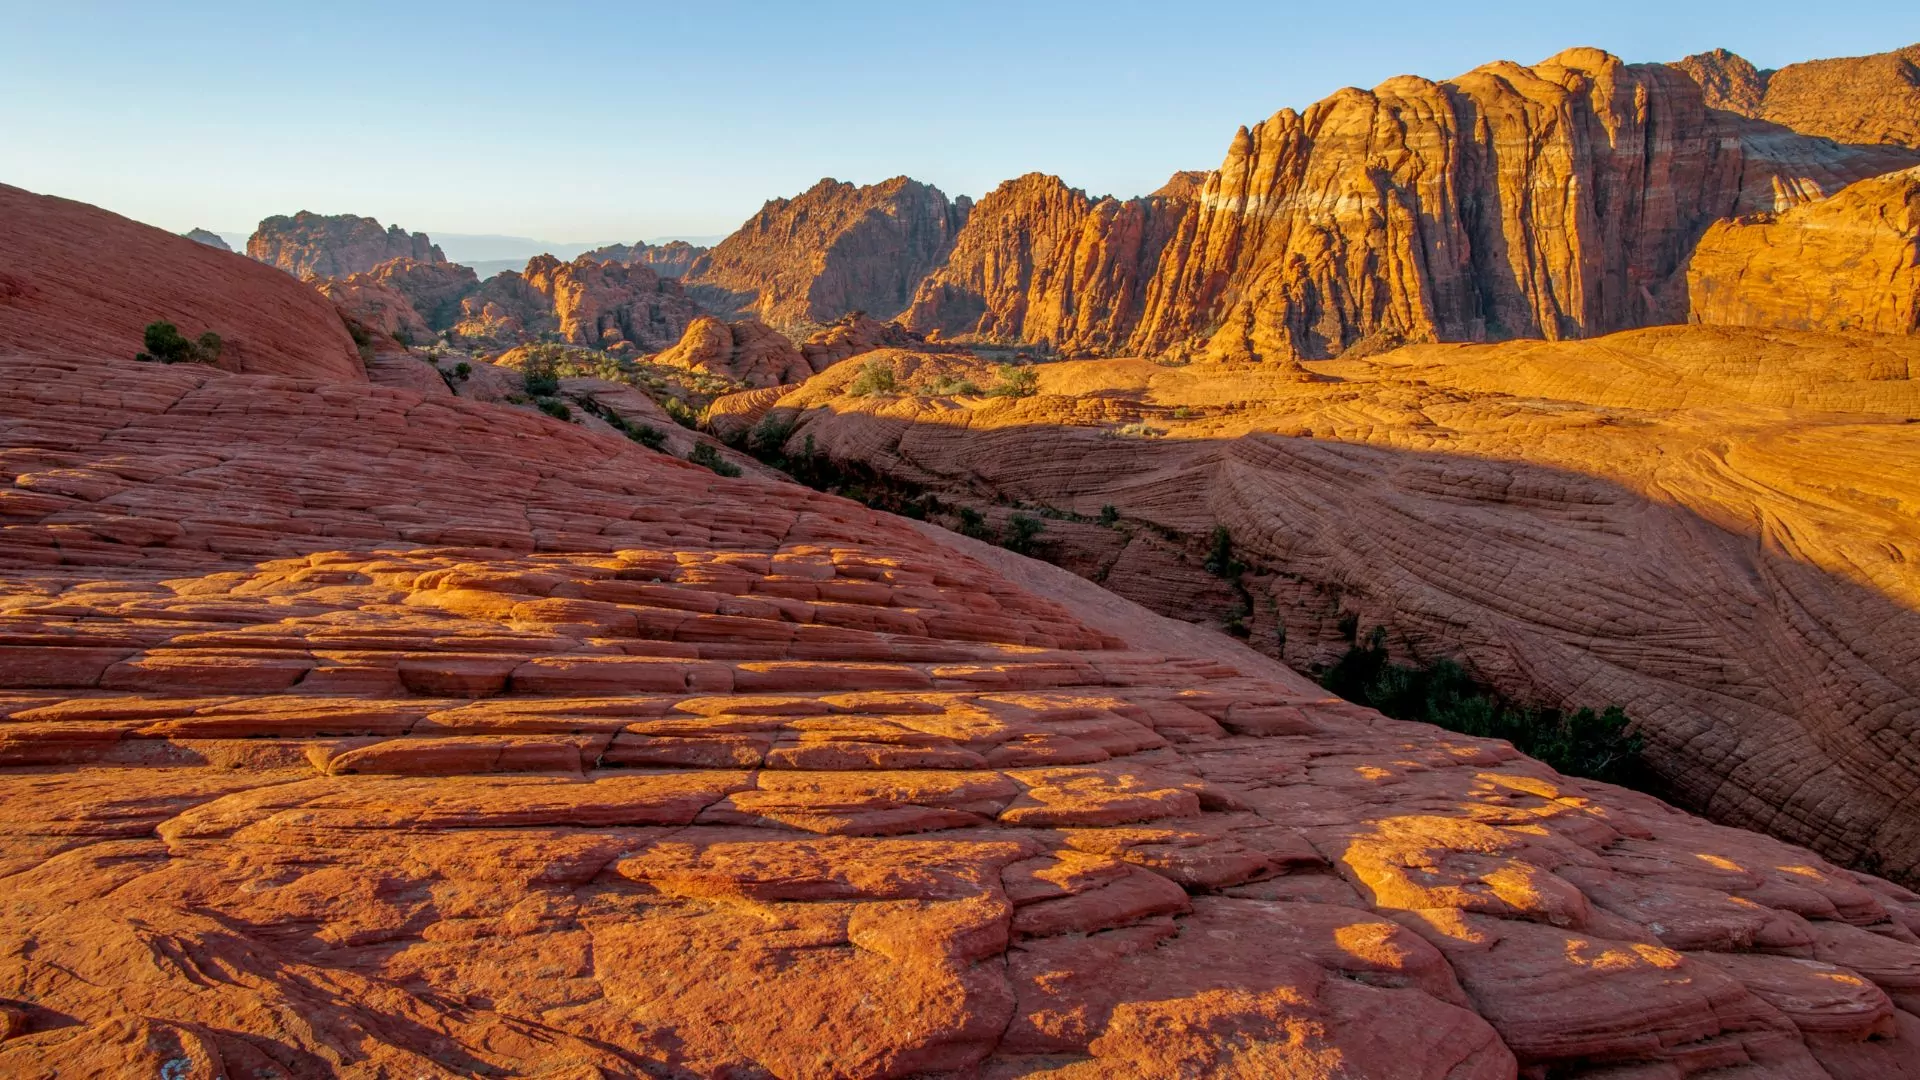 The red rocks of Snow Canyon State Park are set off by the glow of the setting sun